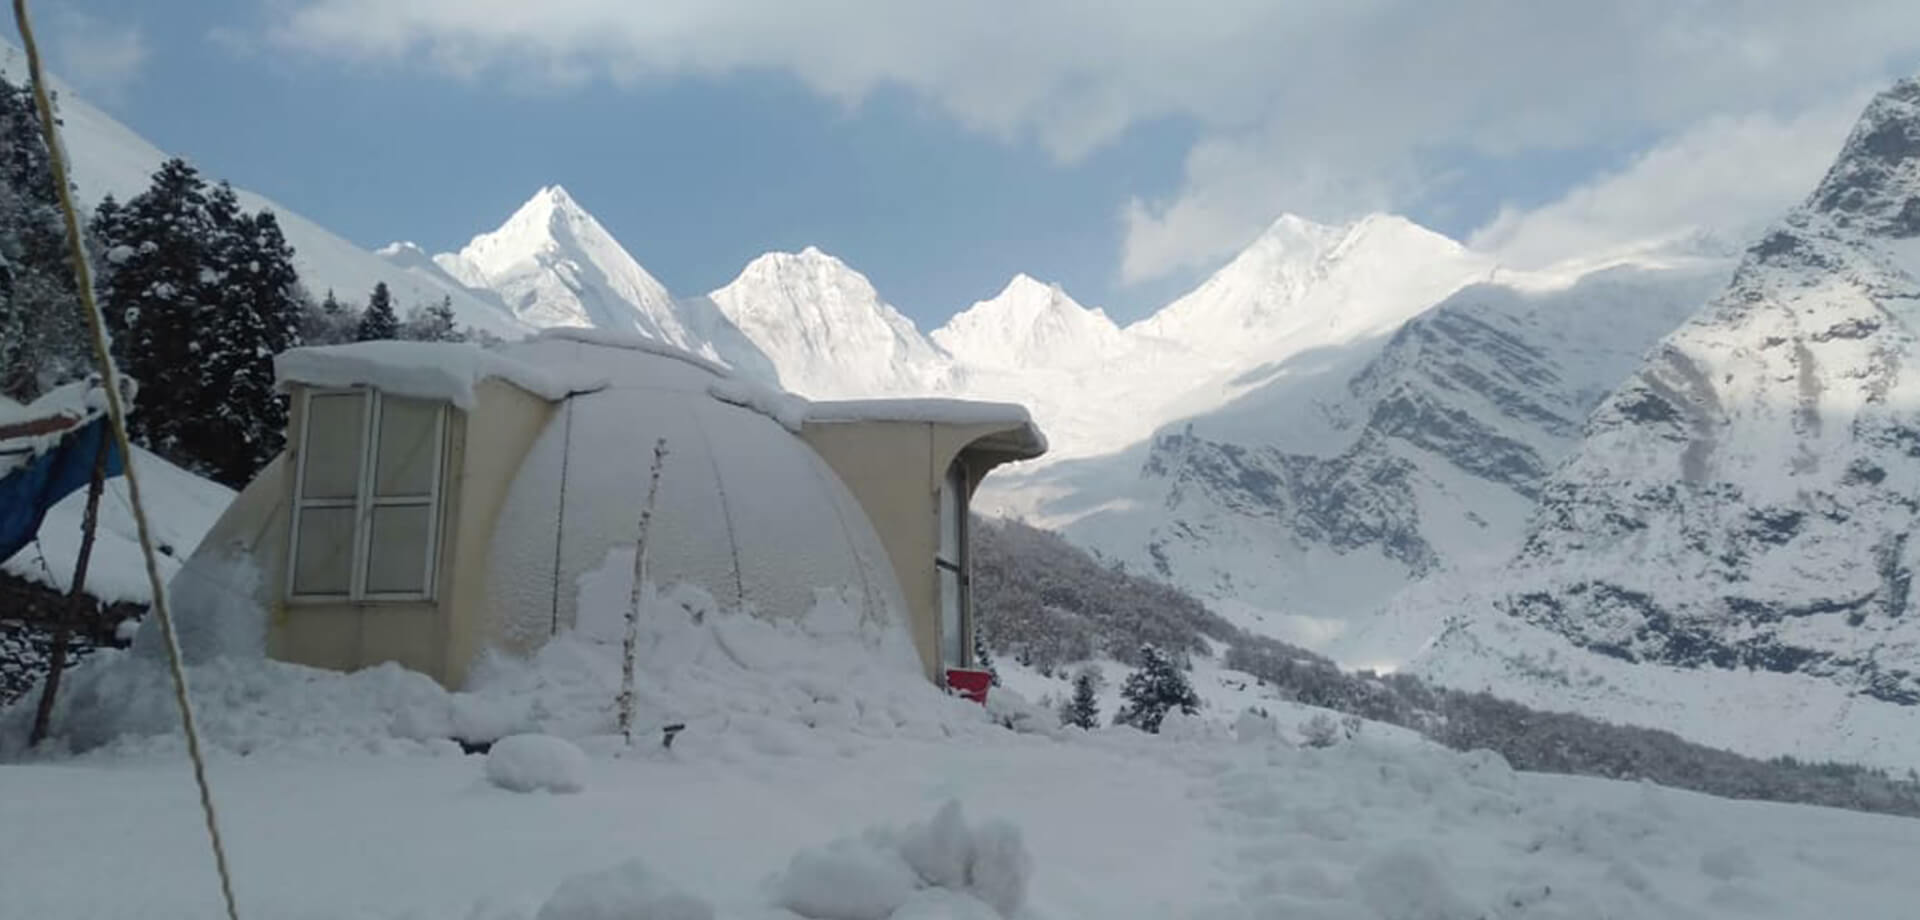 A hotel made of an igloo-shaped structure providing a unique experience